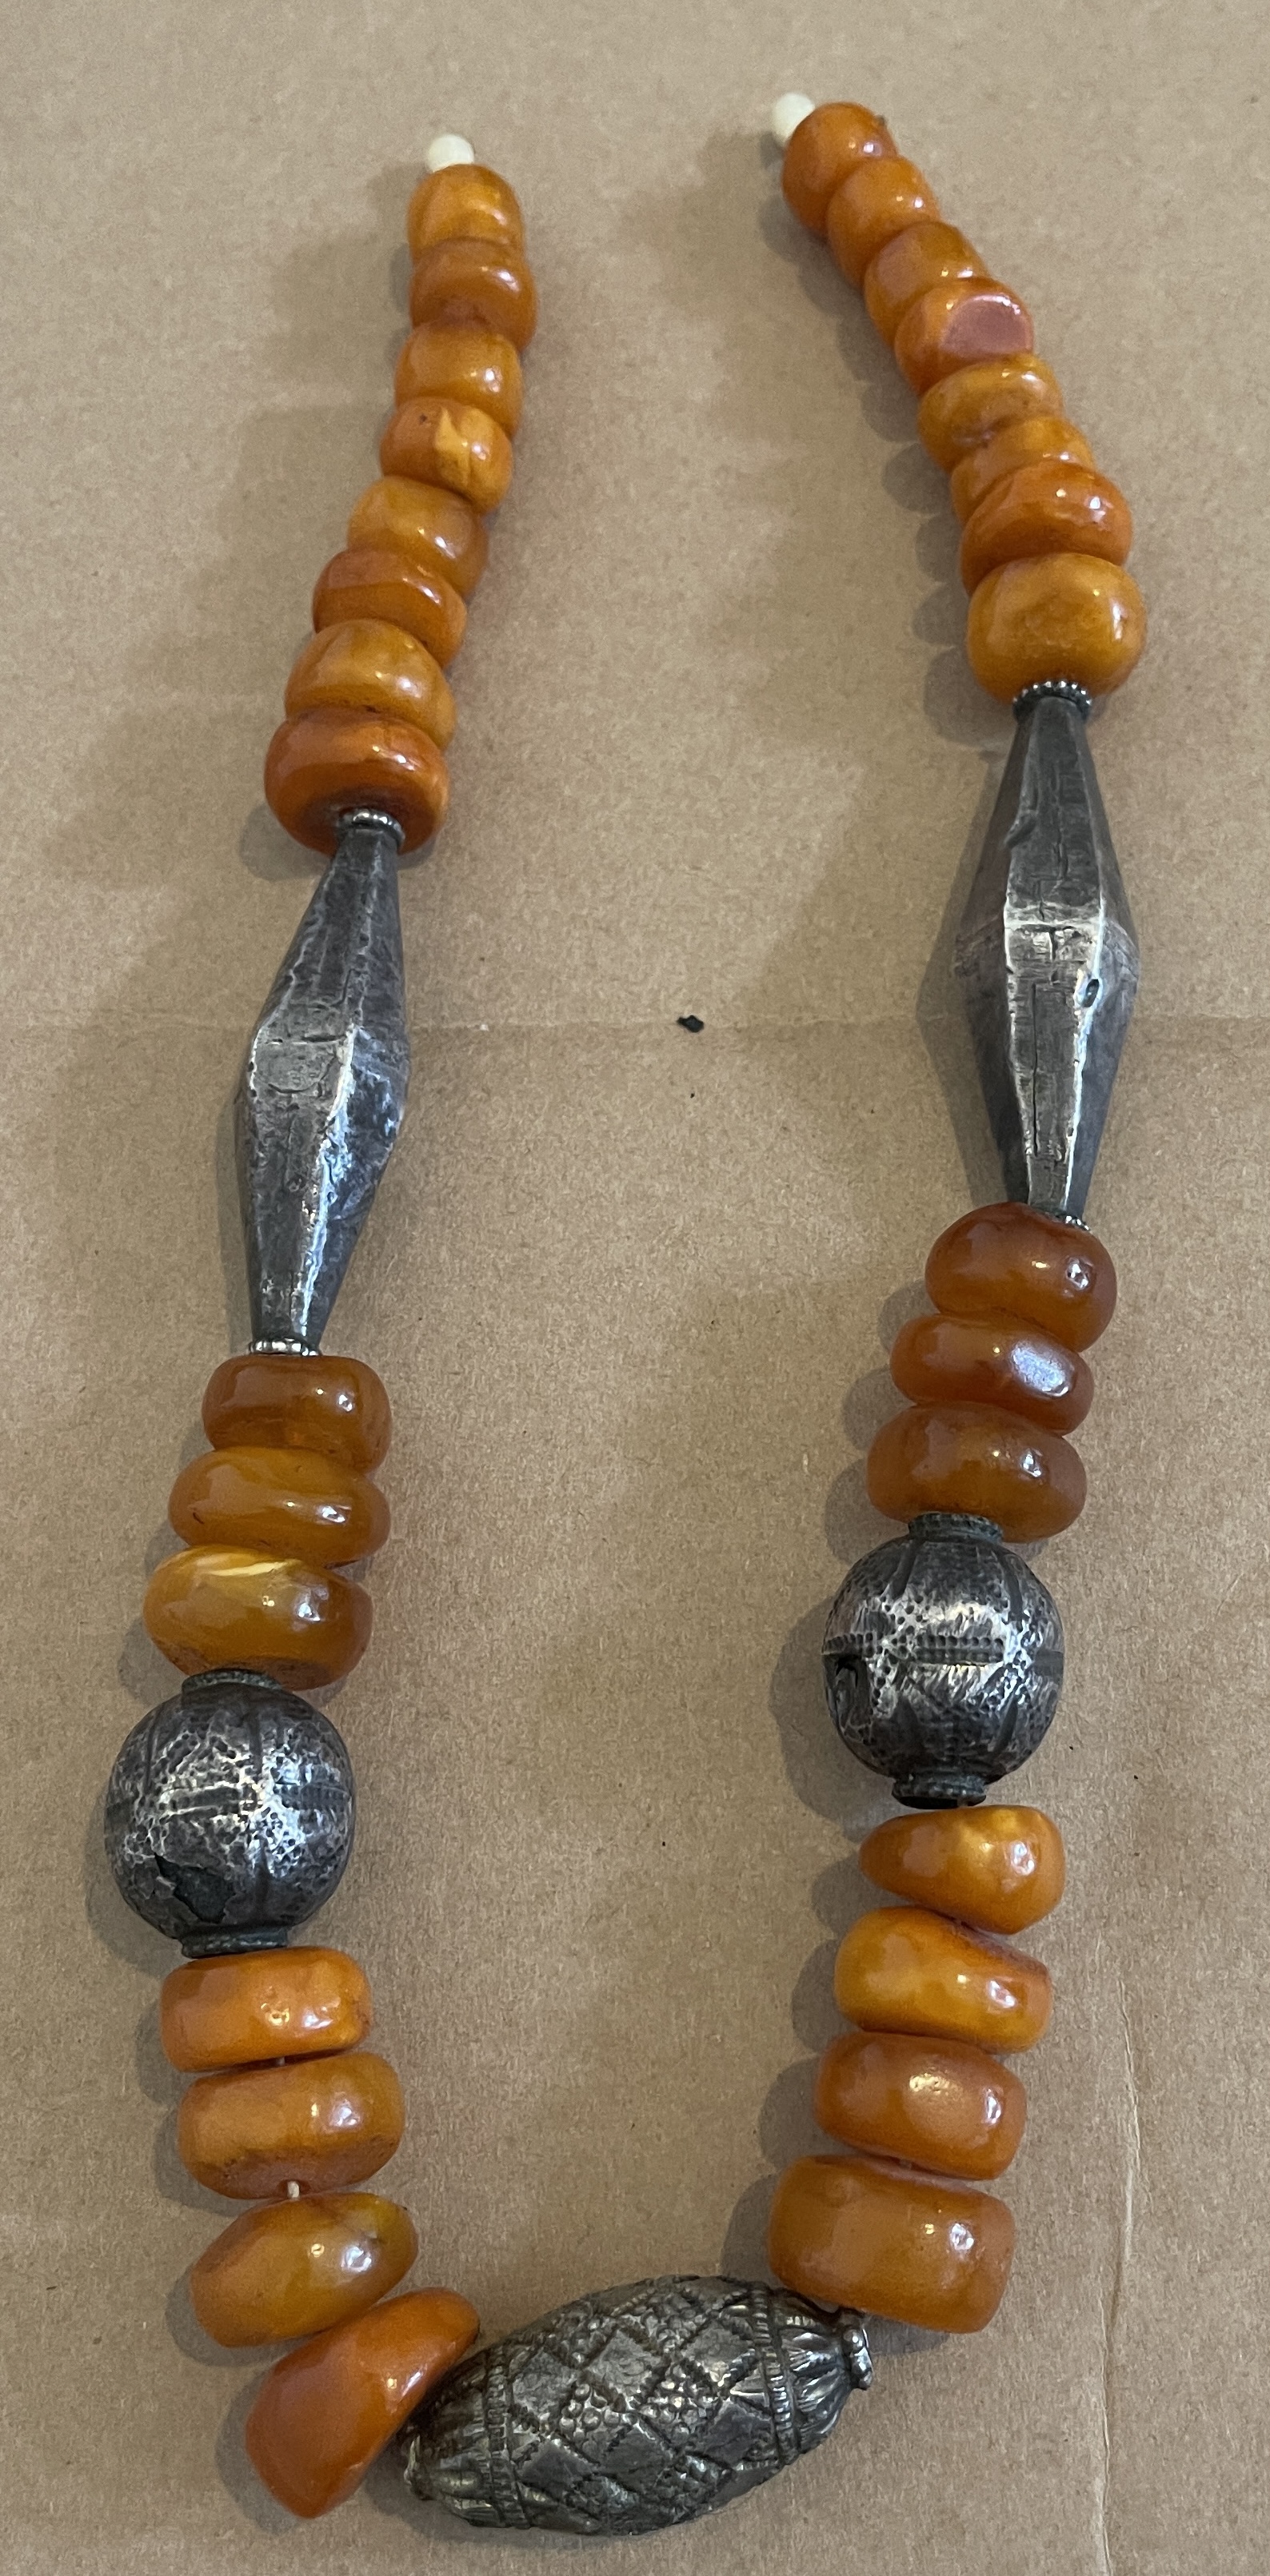 Antique Ethnic Berber? Silver and Amber/Bakelite Necklace - 49cm long - 104 grams. - Image 11 of 12